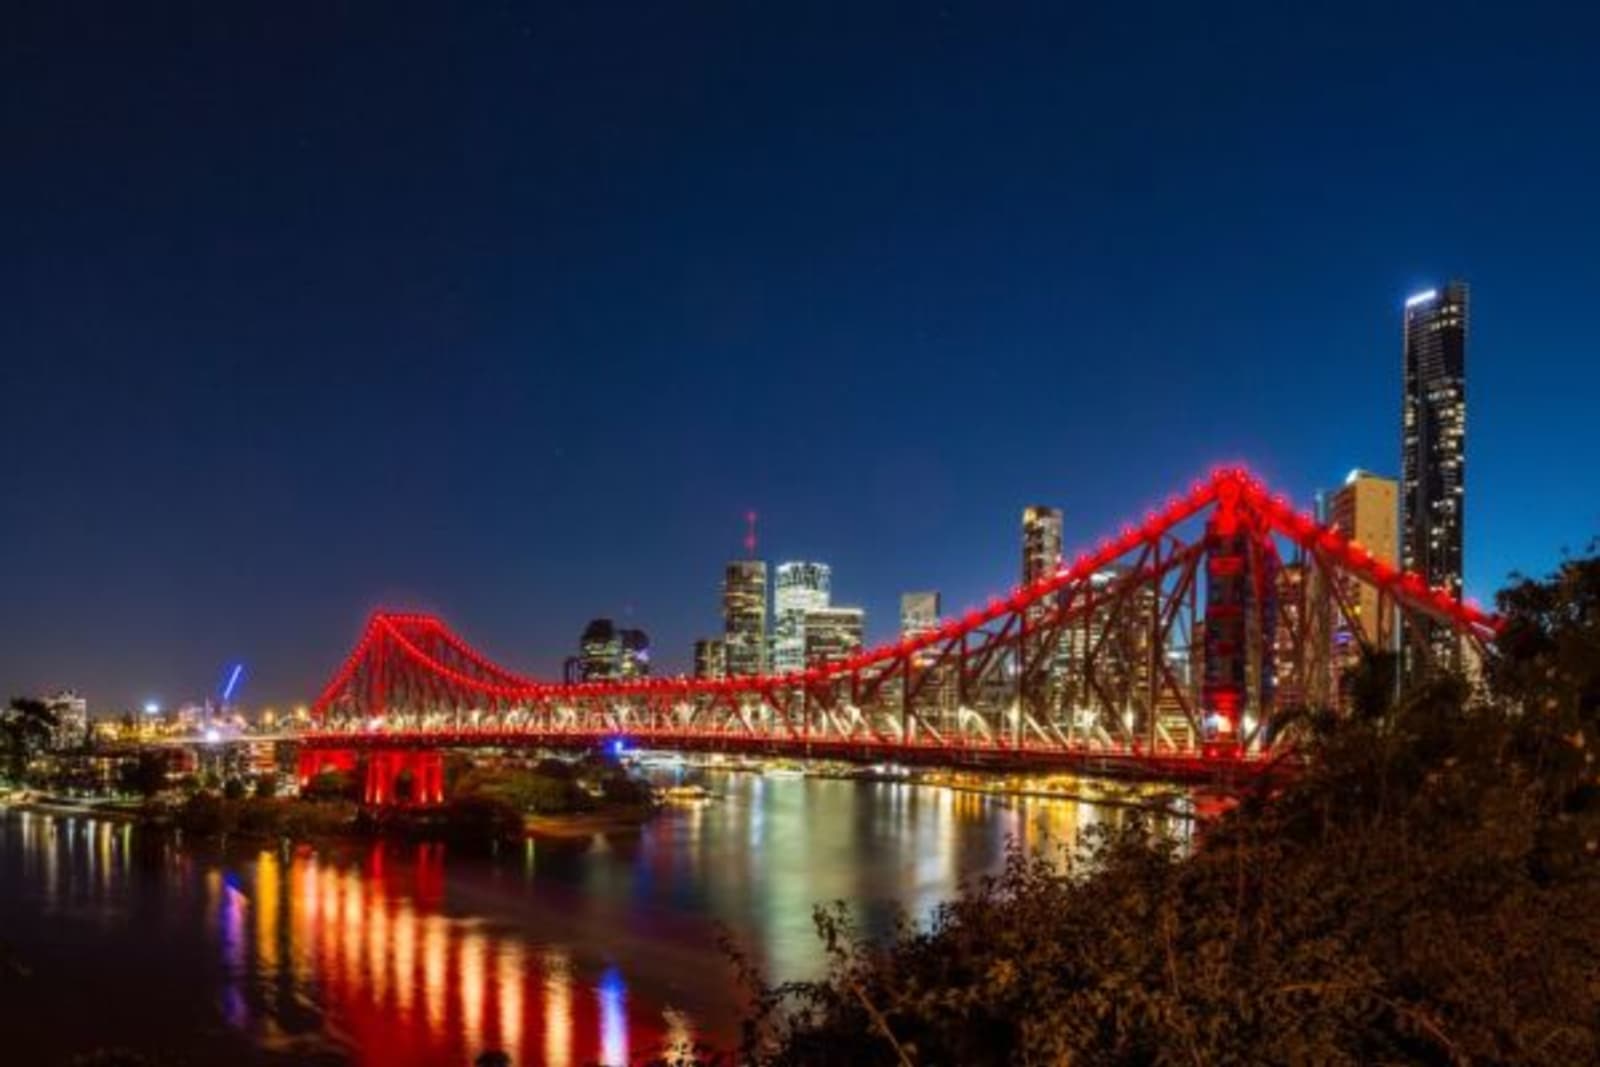 Brisbane cross the river bridge lite up red with city view in background during nighttime